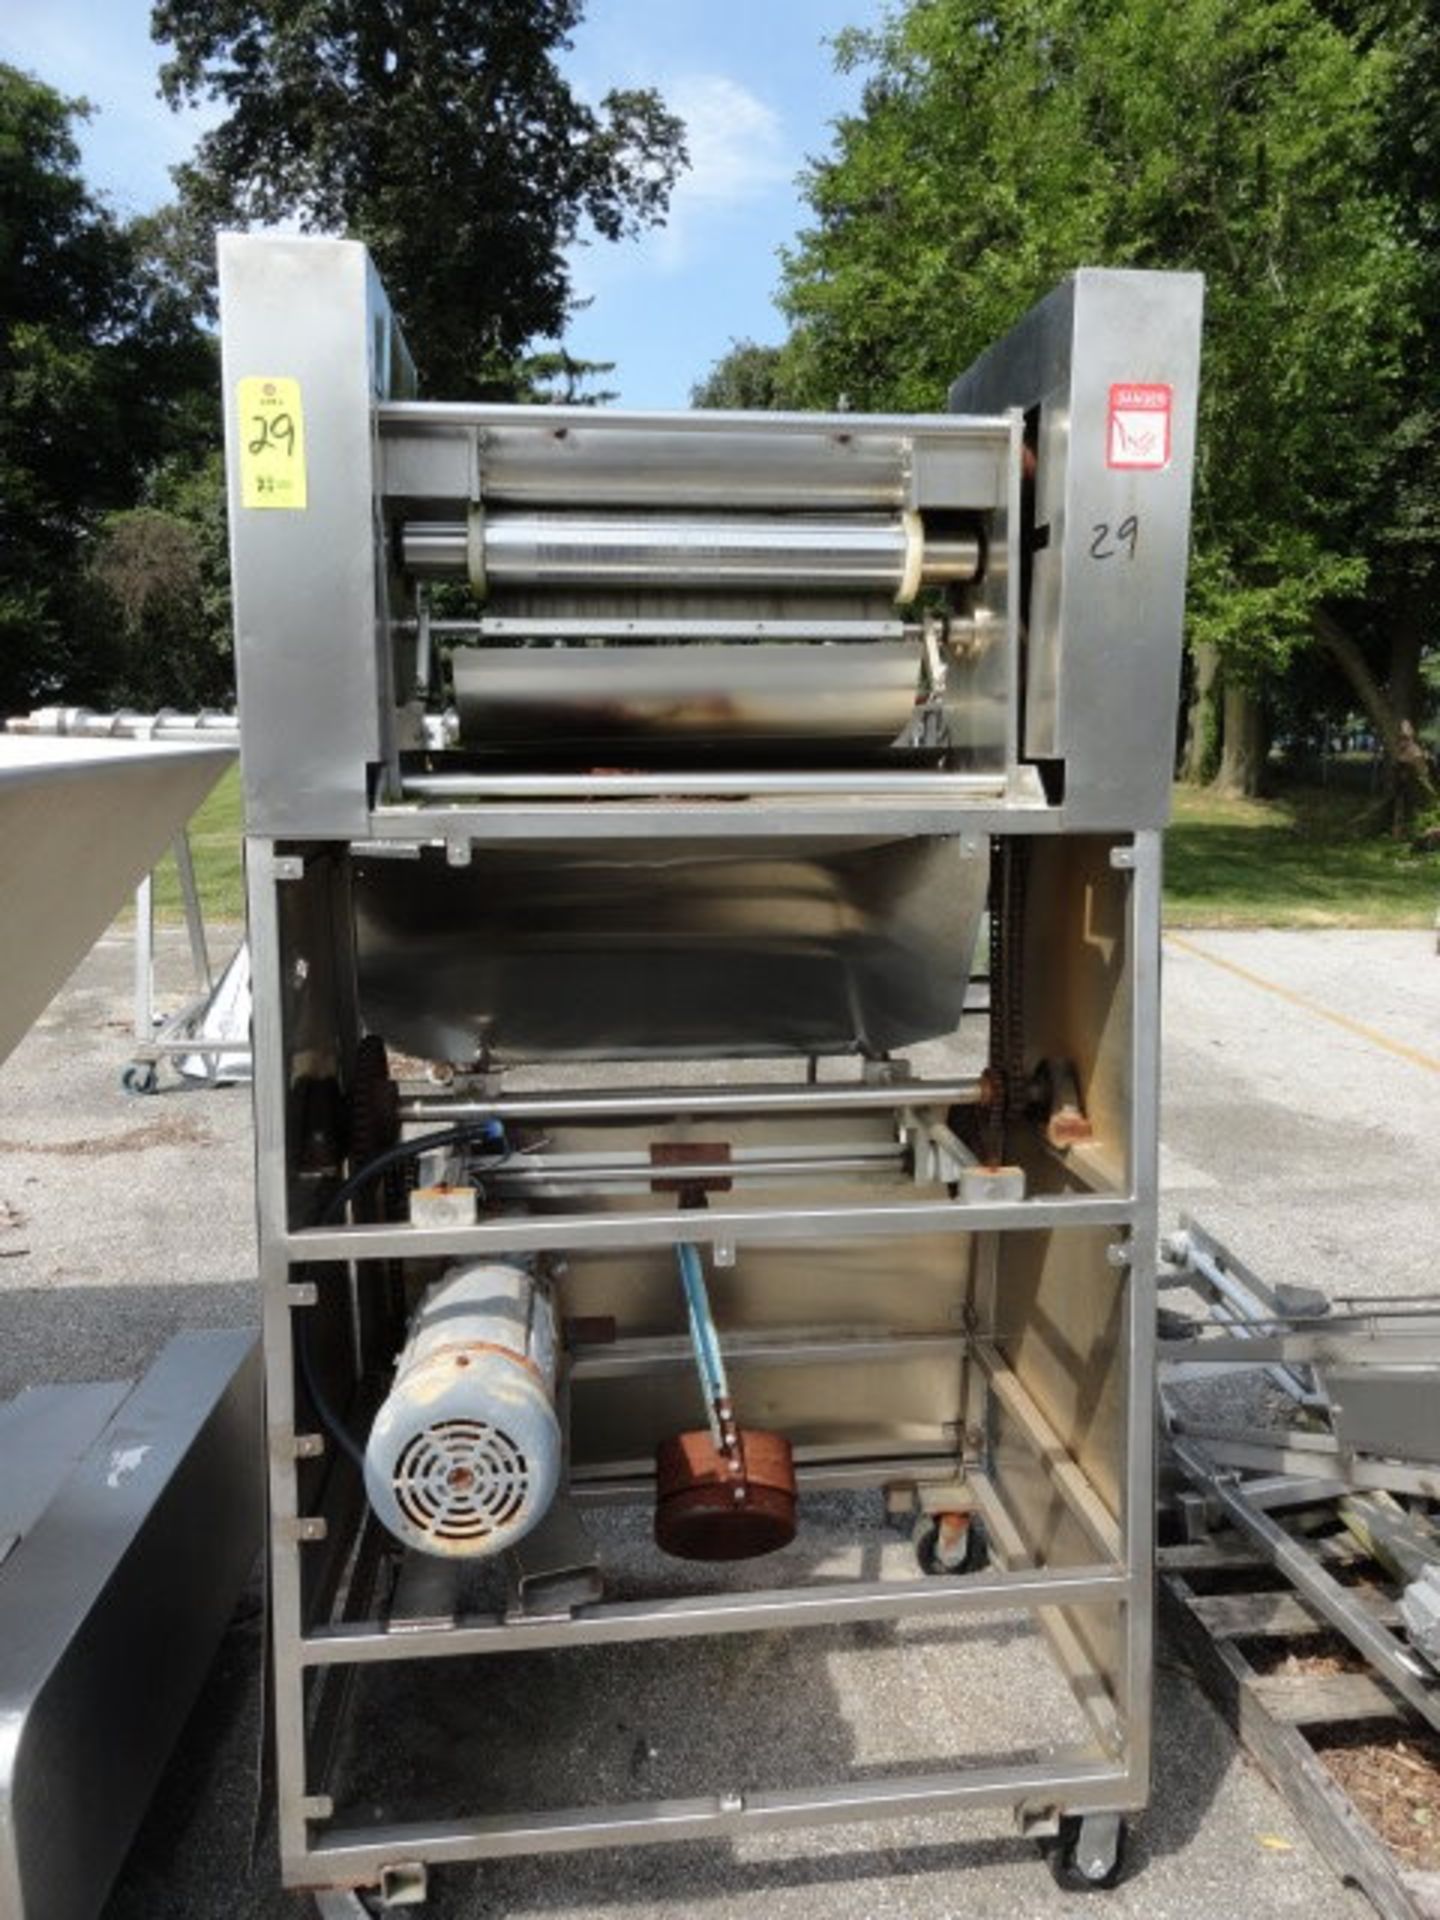 Stainless Steel Sheeting Section, 21" rollers, incomplete parts only, ($150.00 Required Loading Fee-